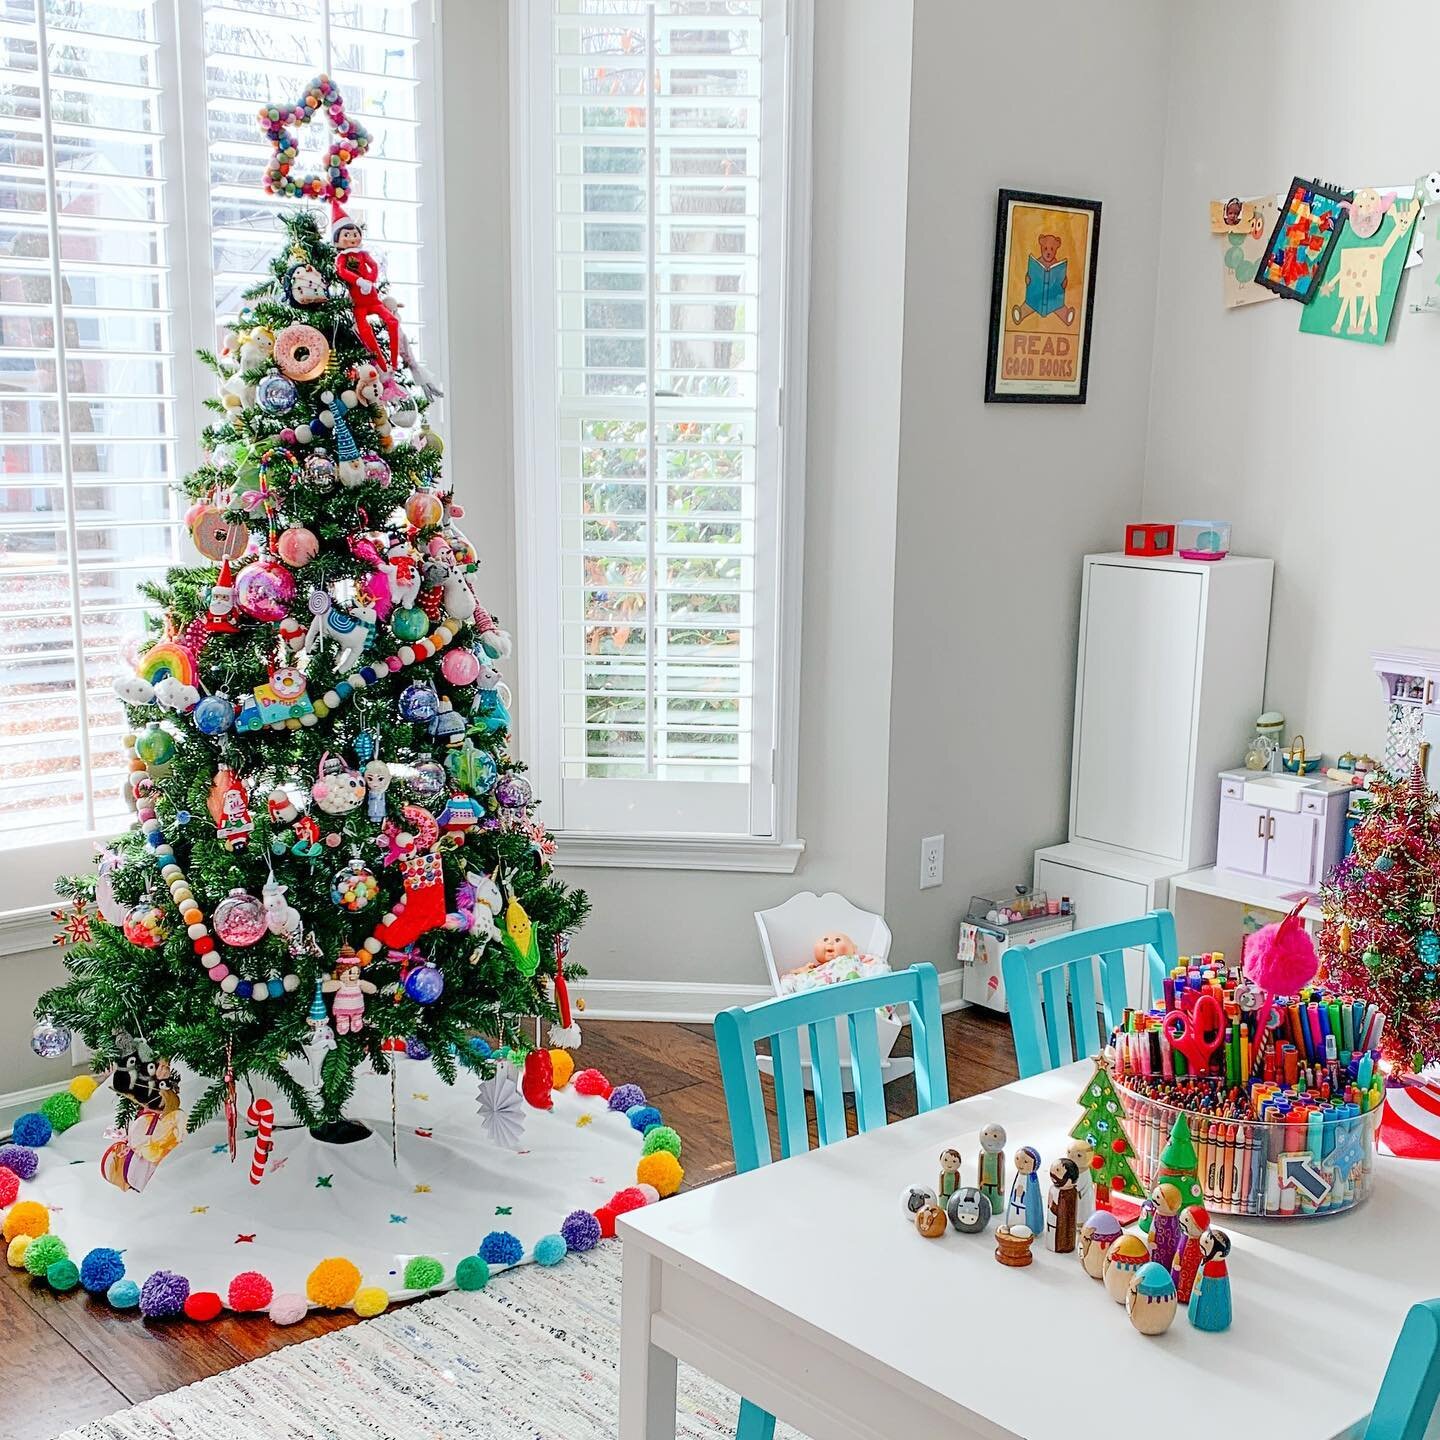 A lot of you asked for a closer-up view of my daughter&rsquo;s Christmas tree, so here it is! It is filled with rainbow pom pom everything, all of her homemade ornaments, and lots of other ornaments she has talked me into buying at Target. Everyone n